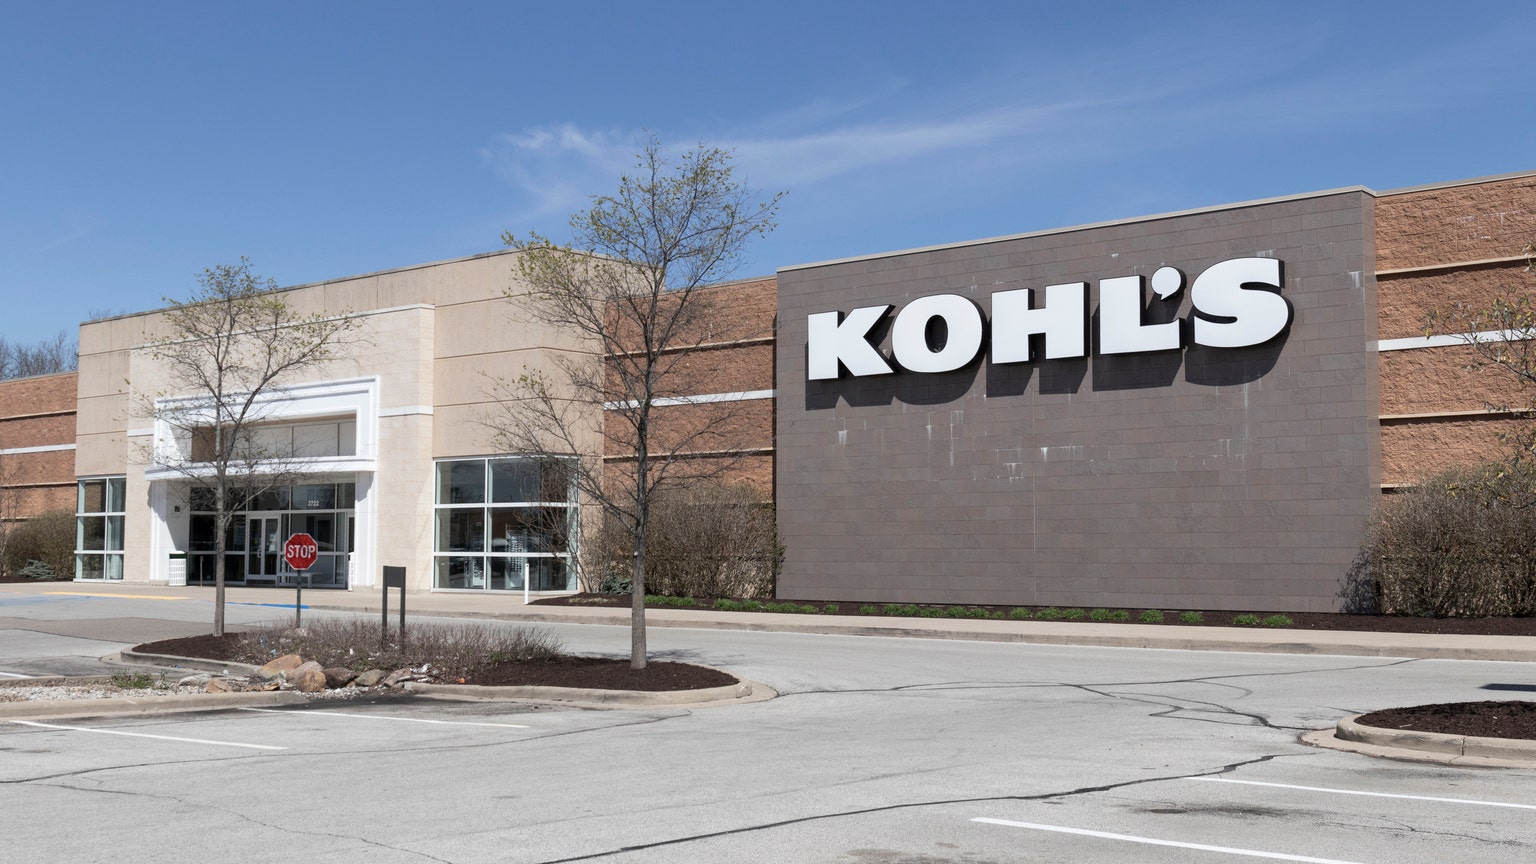 Kohl's abruptly closes location just days after notice goes up leaving  customers 'shocked and blindsided